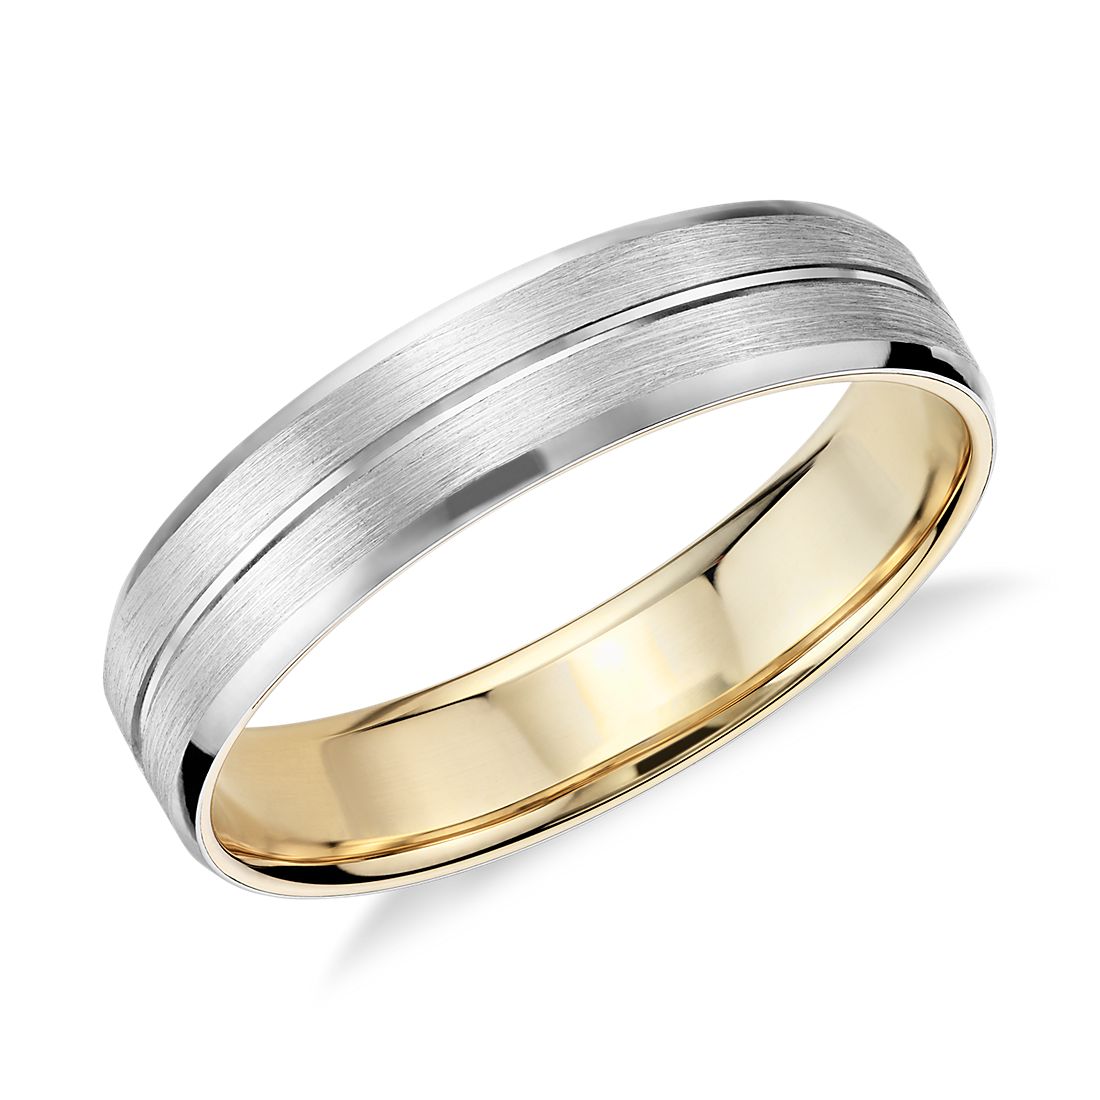 Matte Inlay Wedding Ring in Platinum and 18k Yellow Gold (5mm)